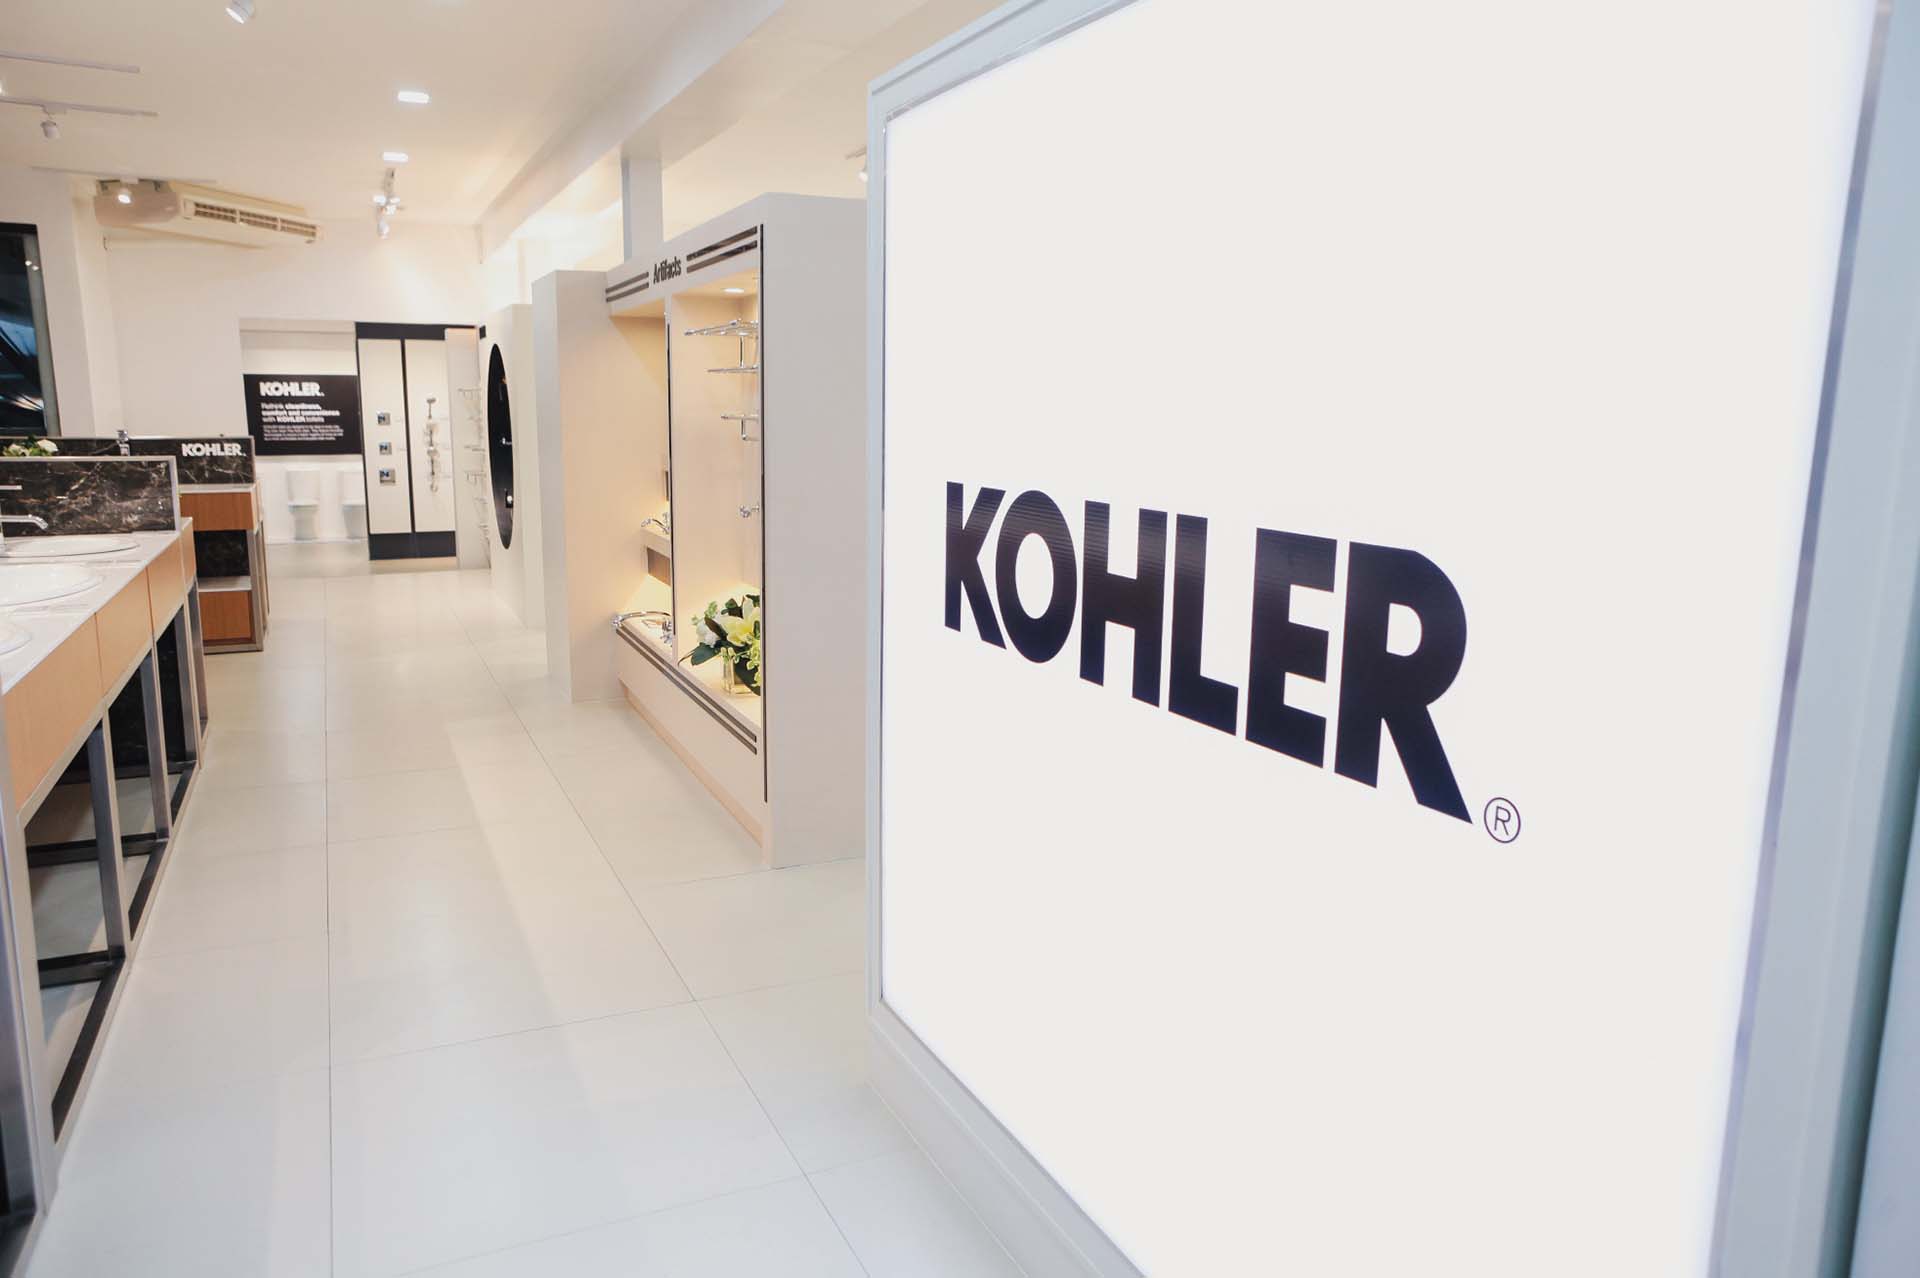 Kohler Kitchen And Bath Group Opens A New Showroom In Cebu And Launched The Latest Intelligent Toilet